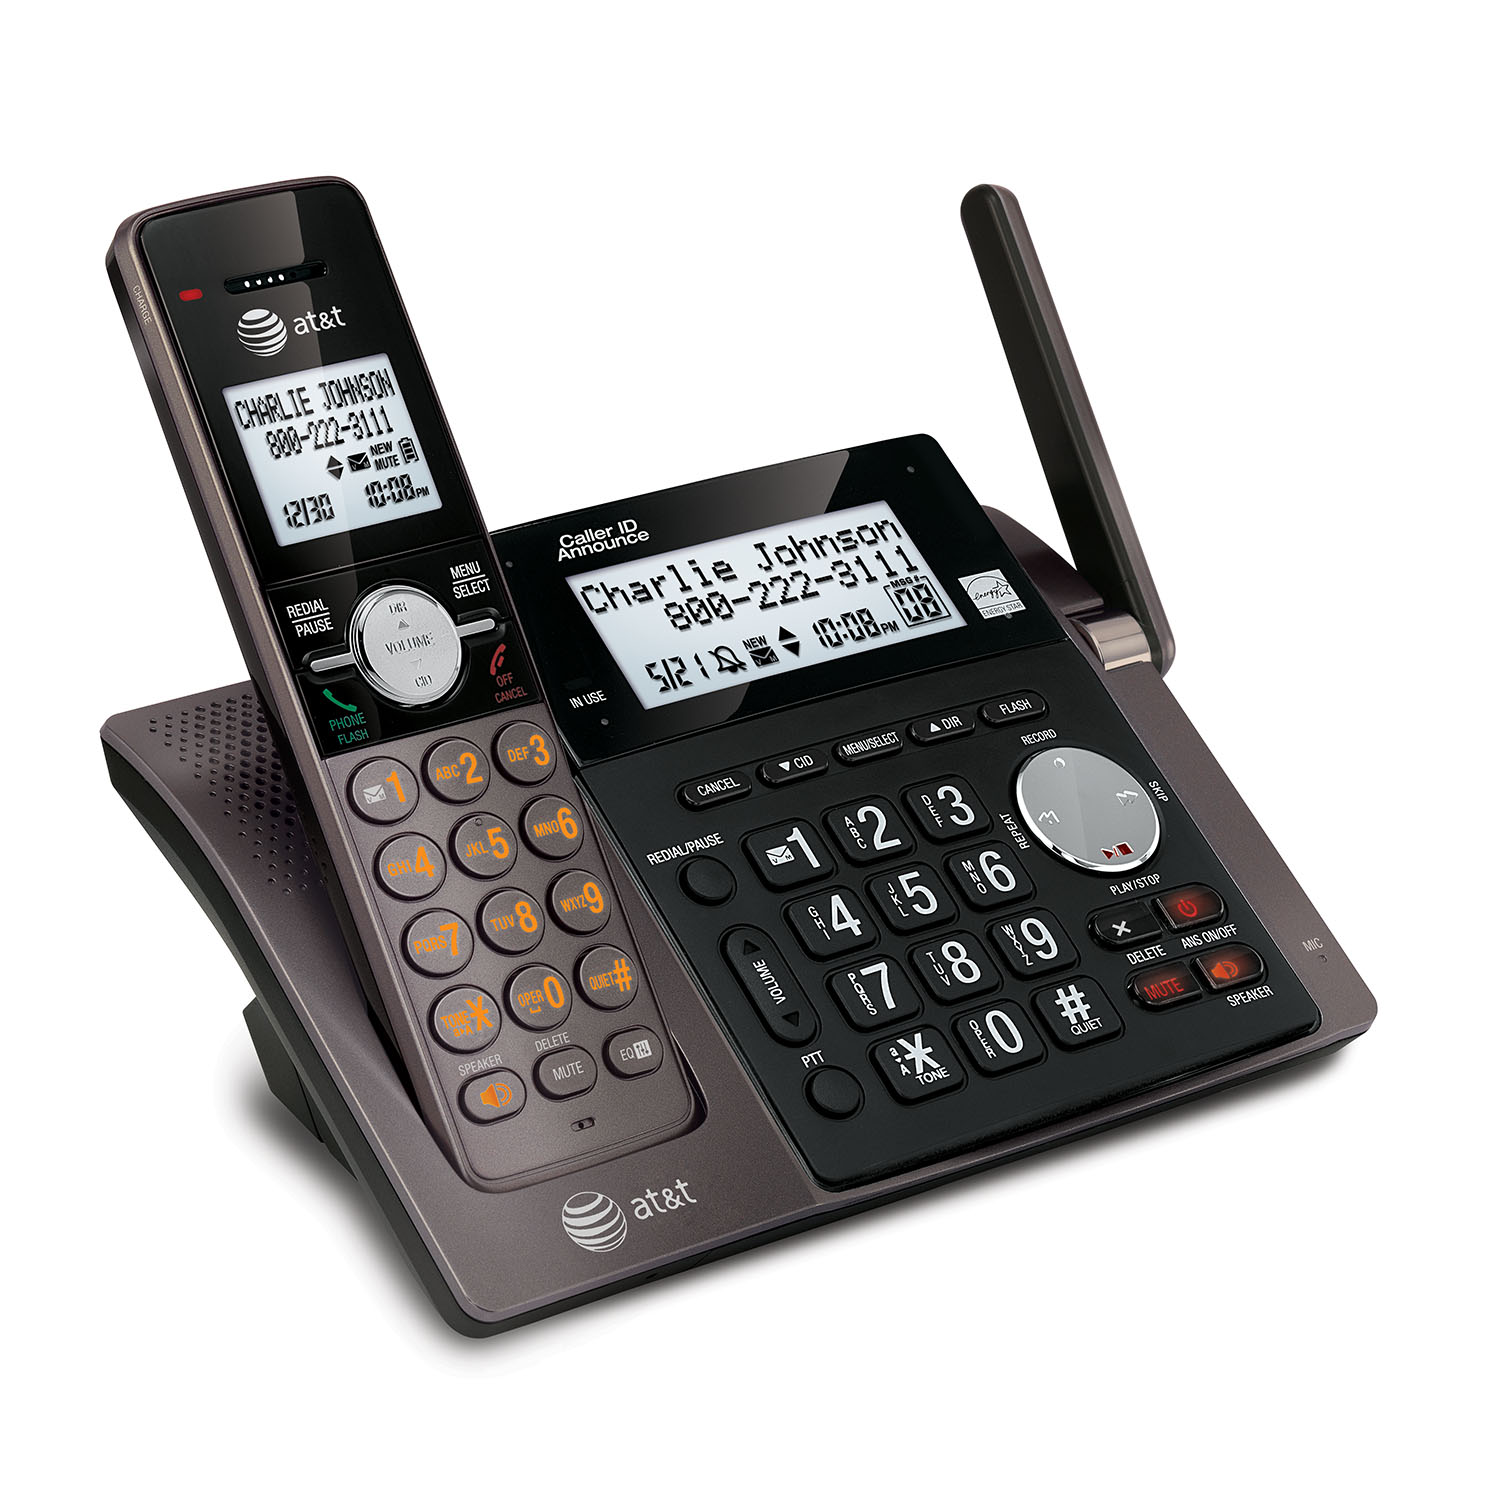 4 handset cordless answering system with caller ID/call waiting - view 2